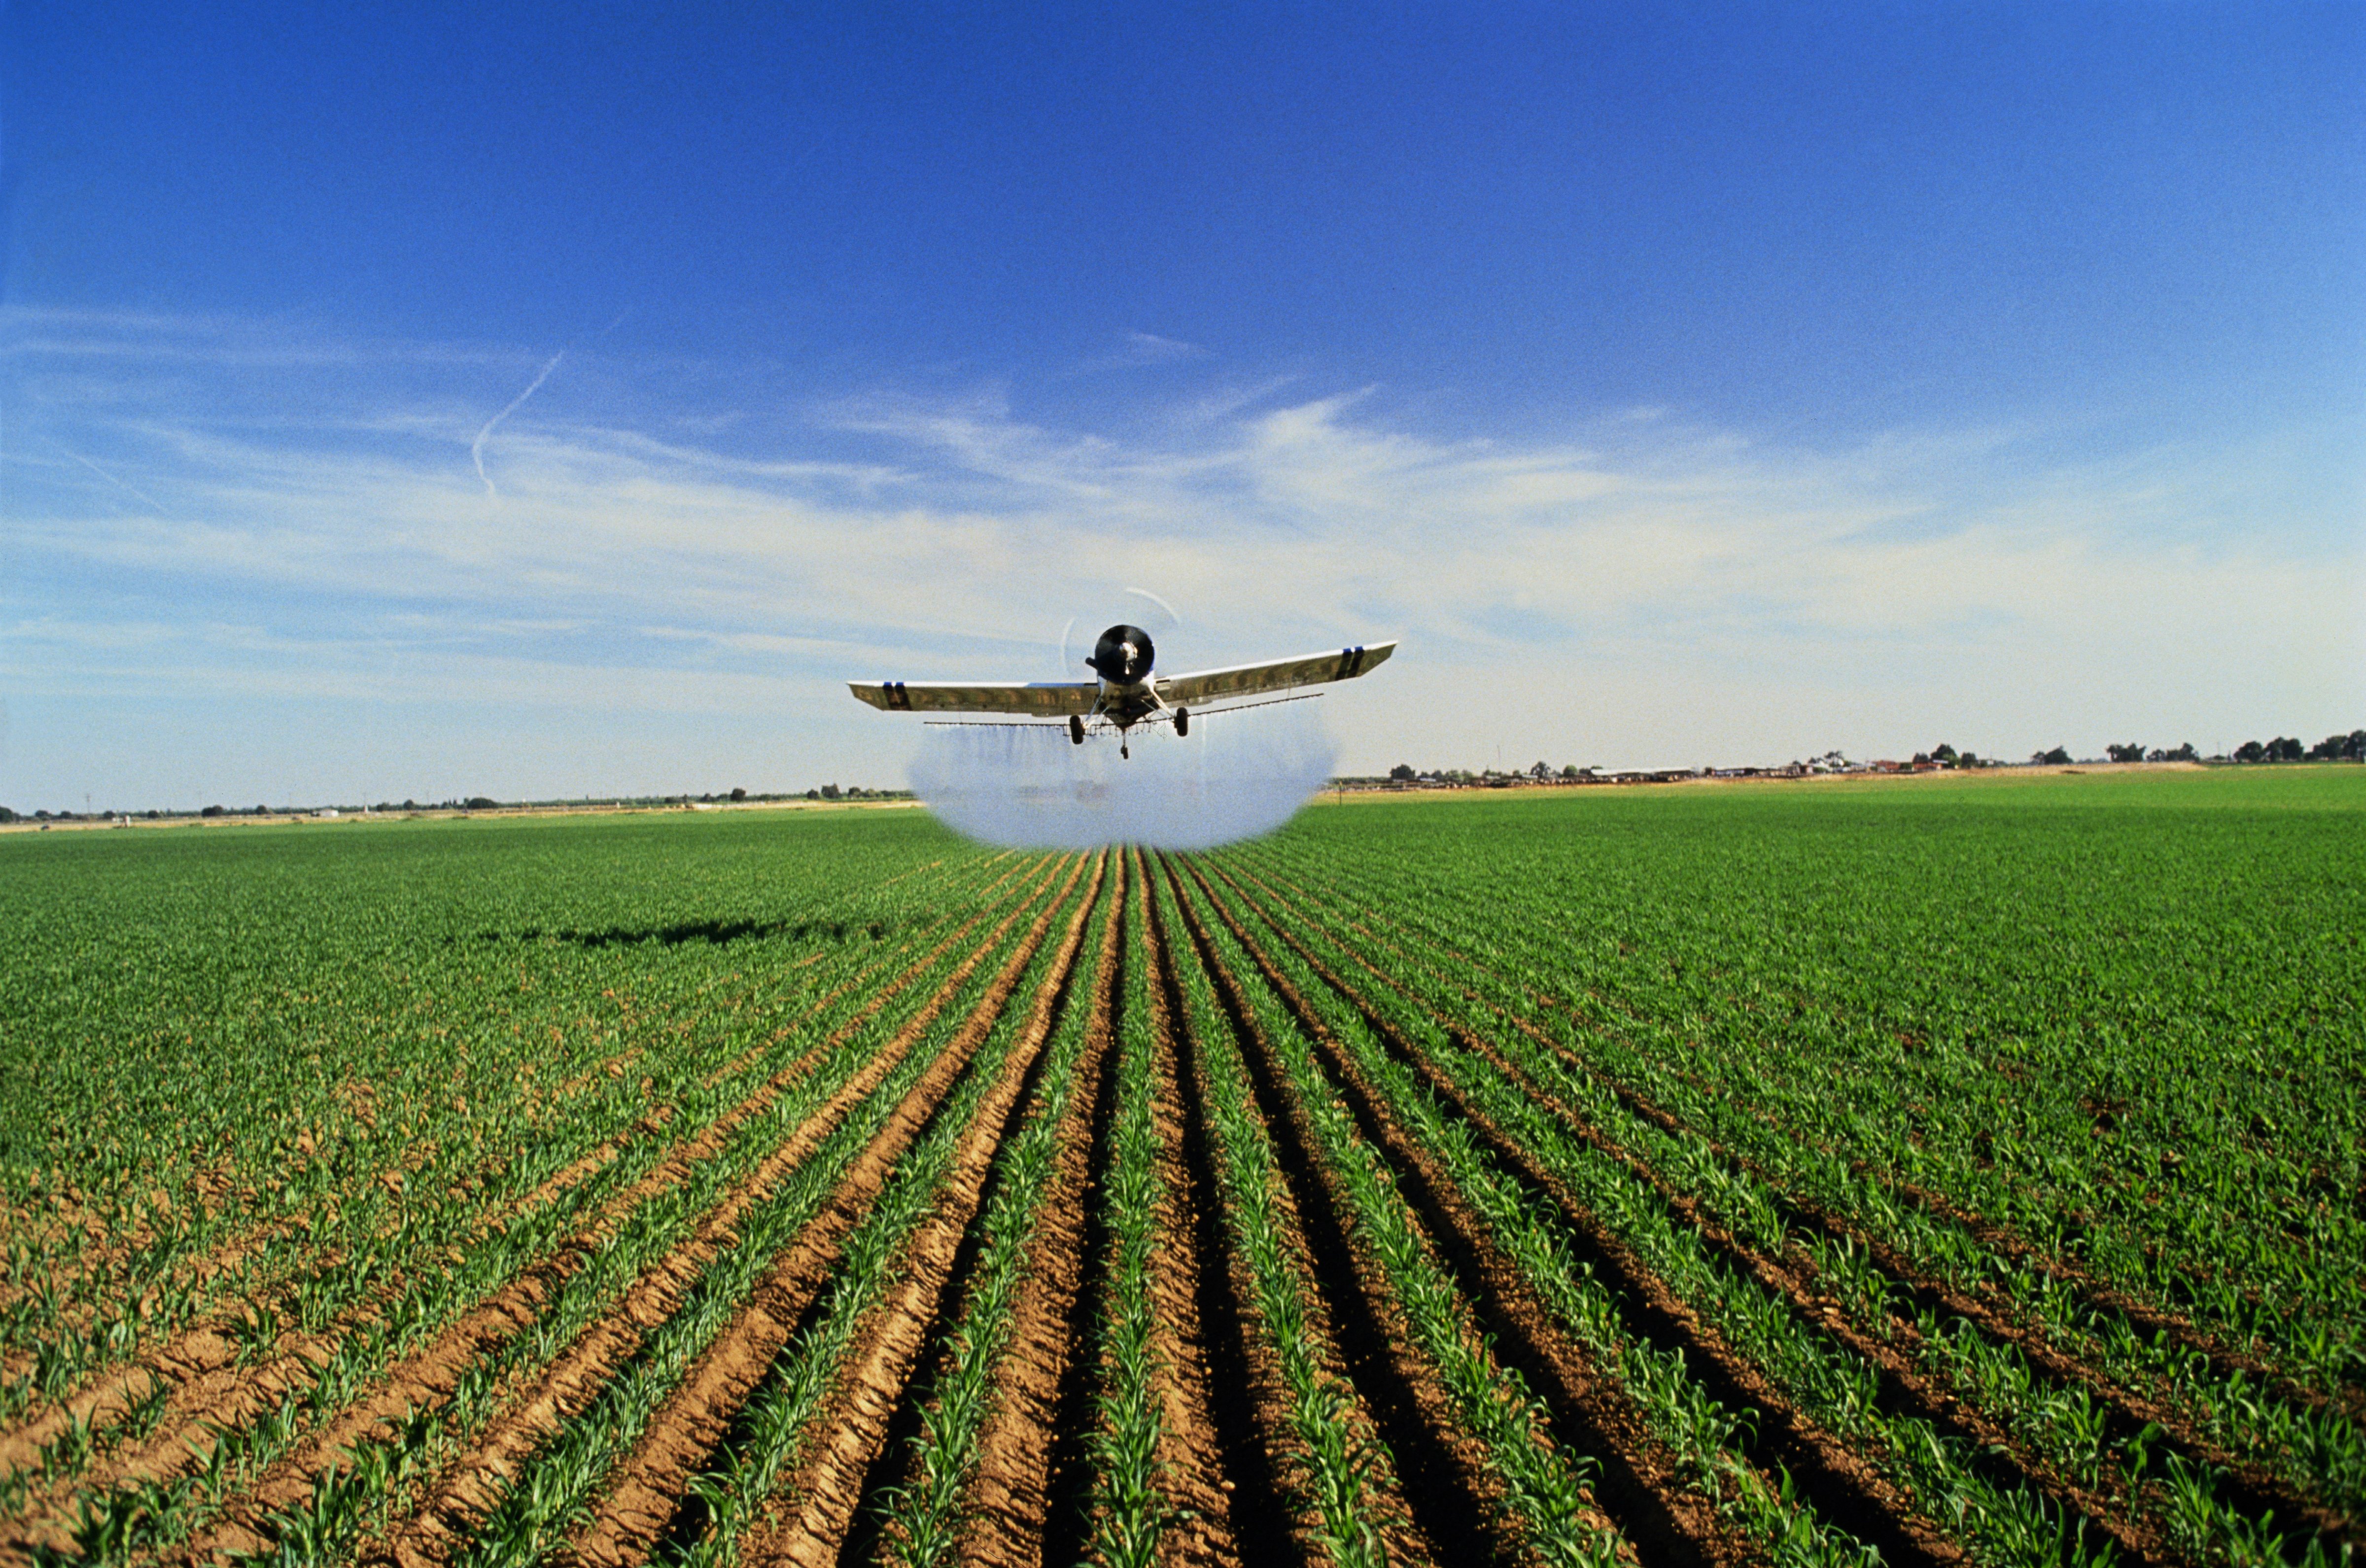 Plane spraying pesticide (Getty Images)